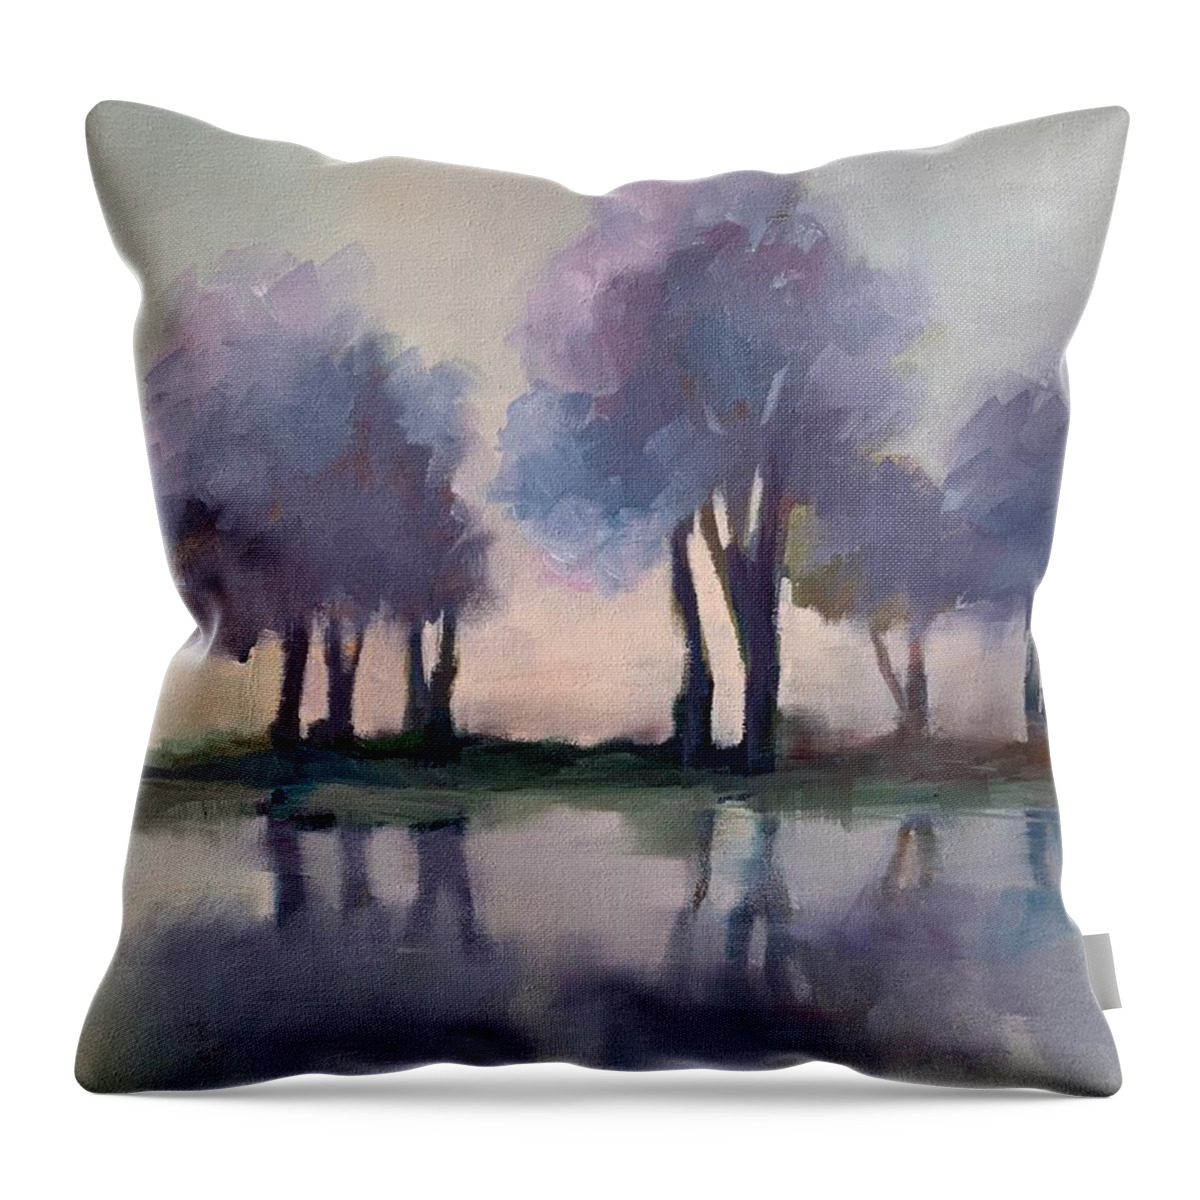 Landscape Throw Pillow featuring the painting Morning Mist by Michelle Abrams